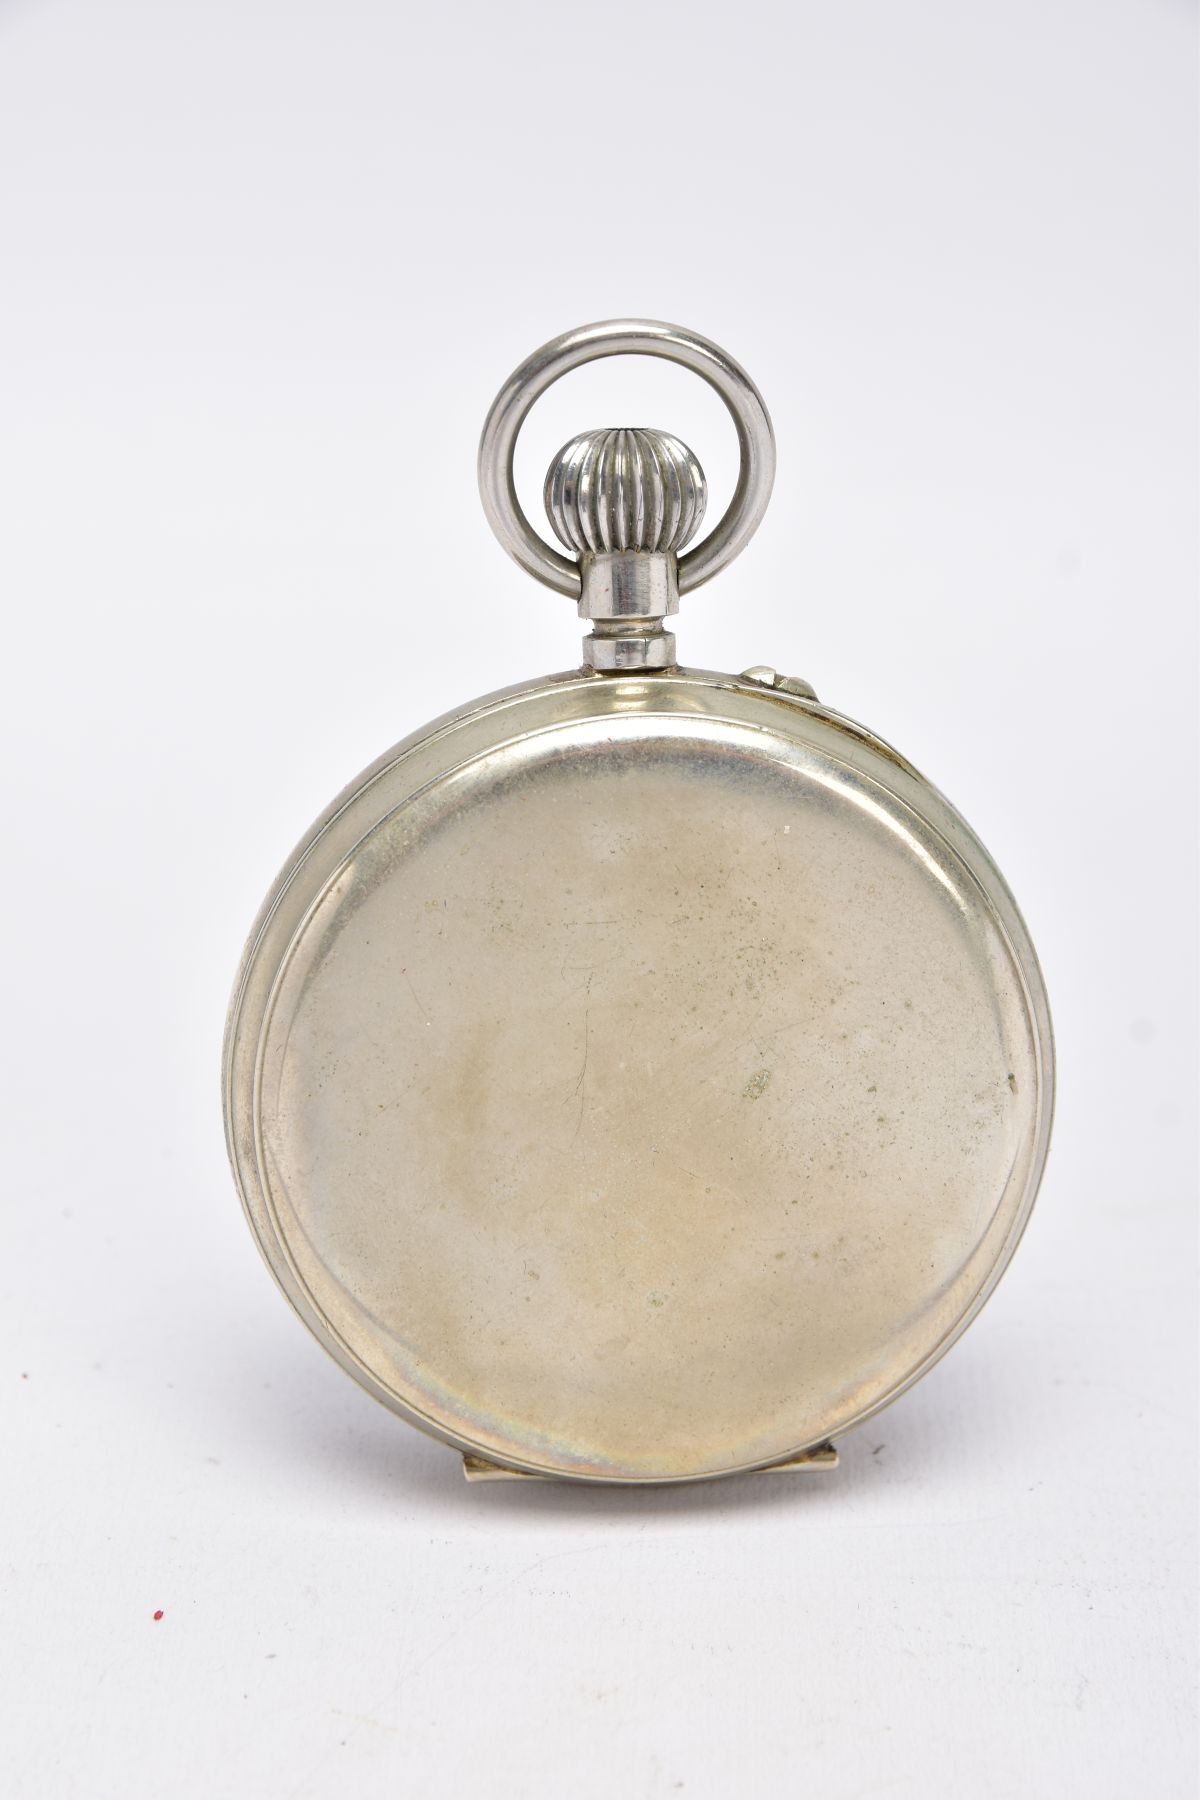 A STEEL GOLIATH POCKET WATCH, dial signed Walter Jones, seconds sweep subsidiary dial at 6 o'clock - Image 4 of 7